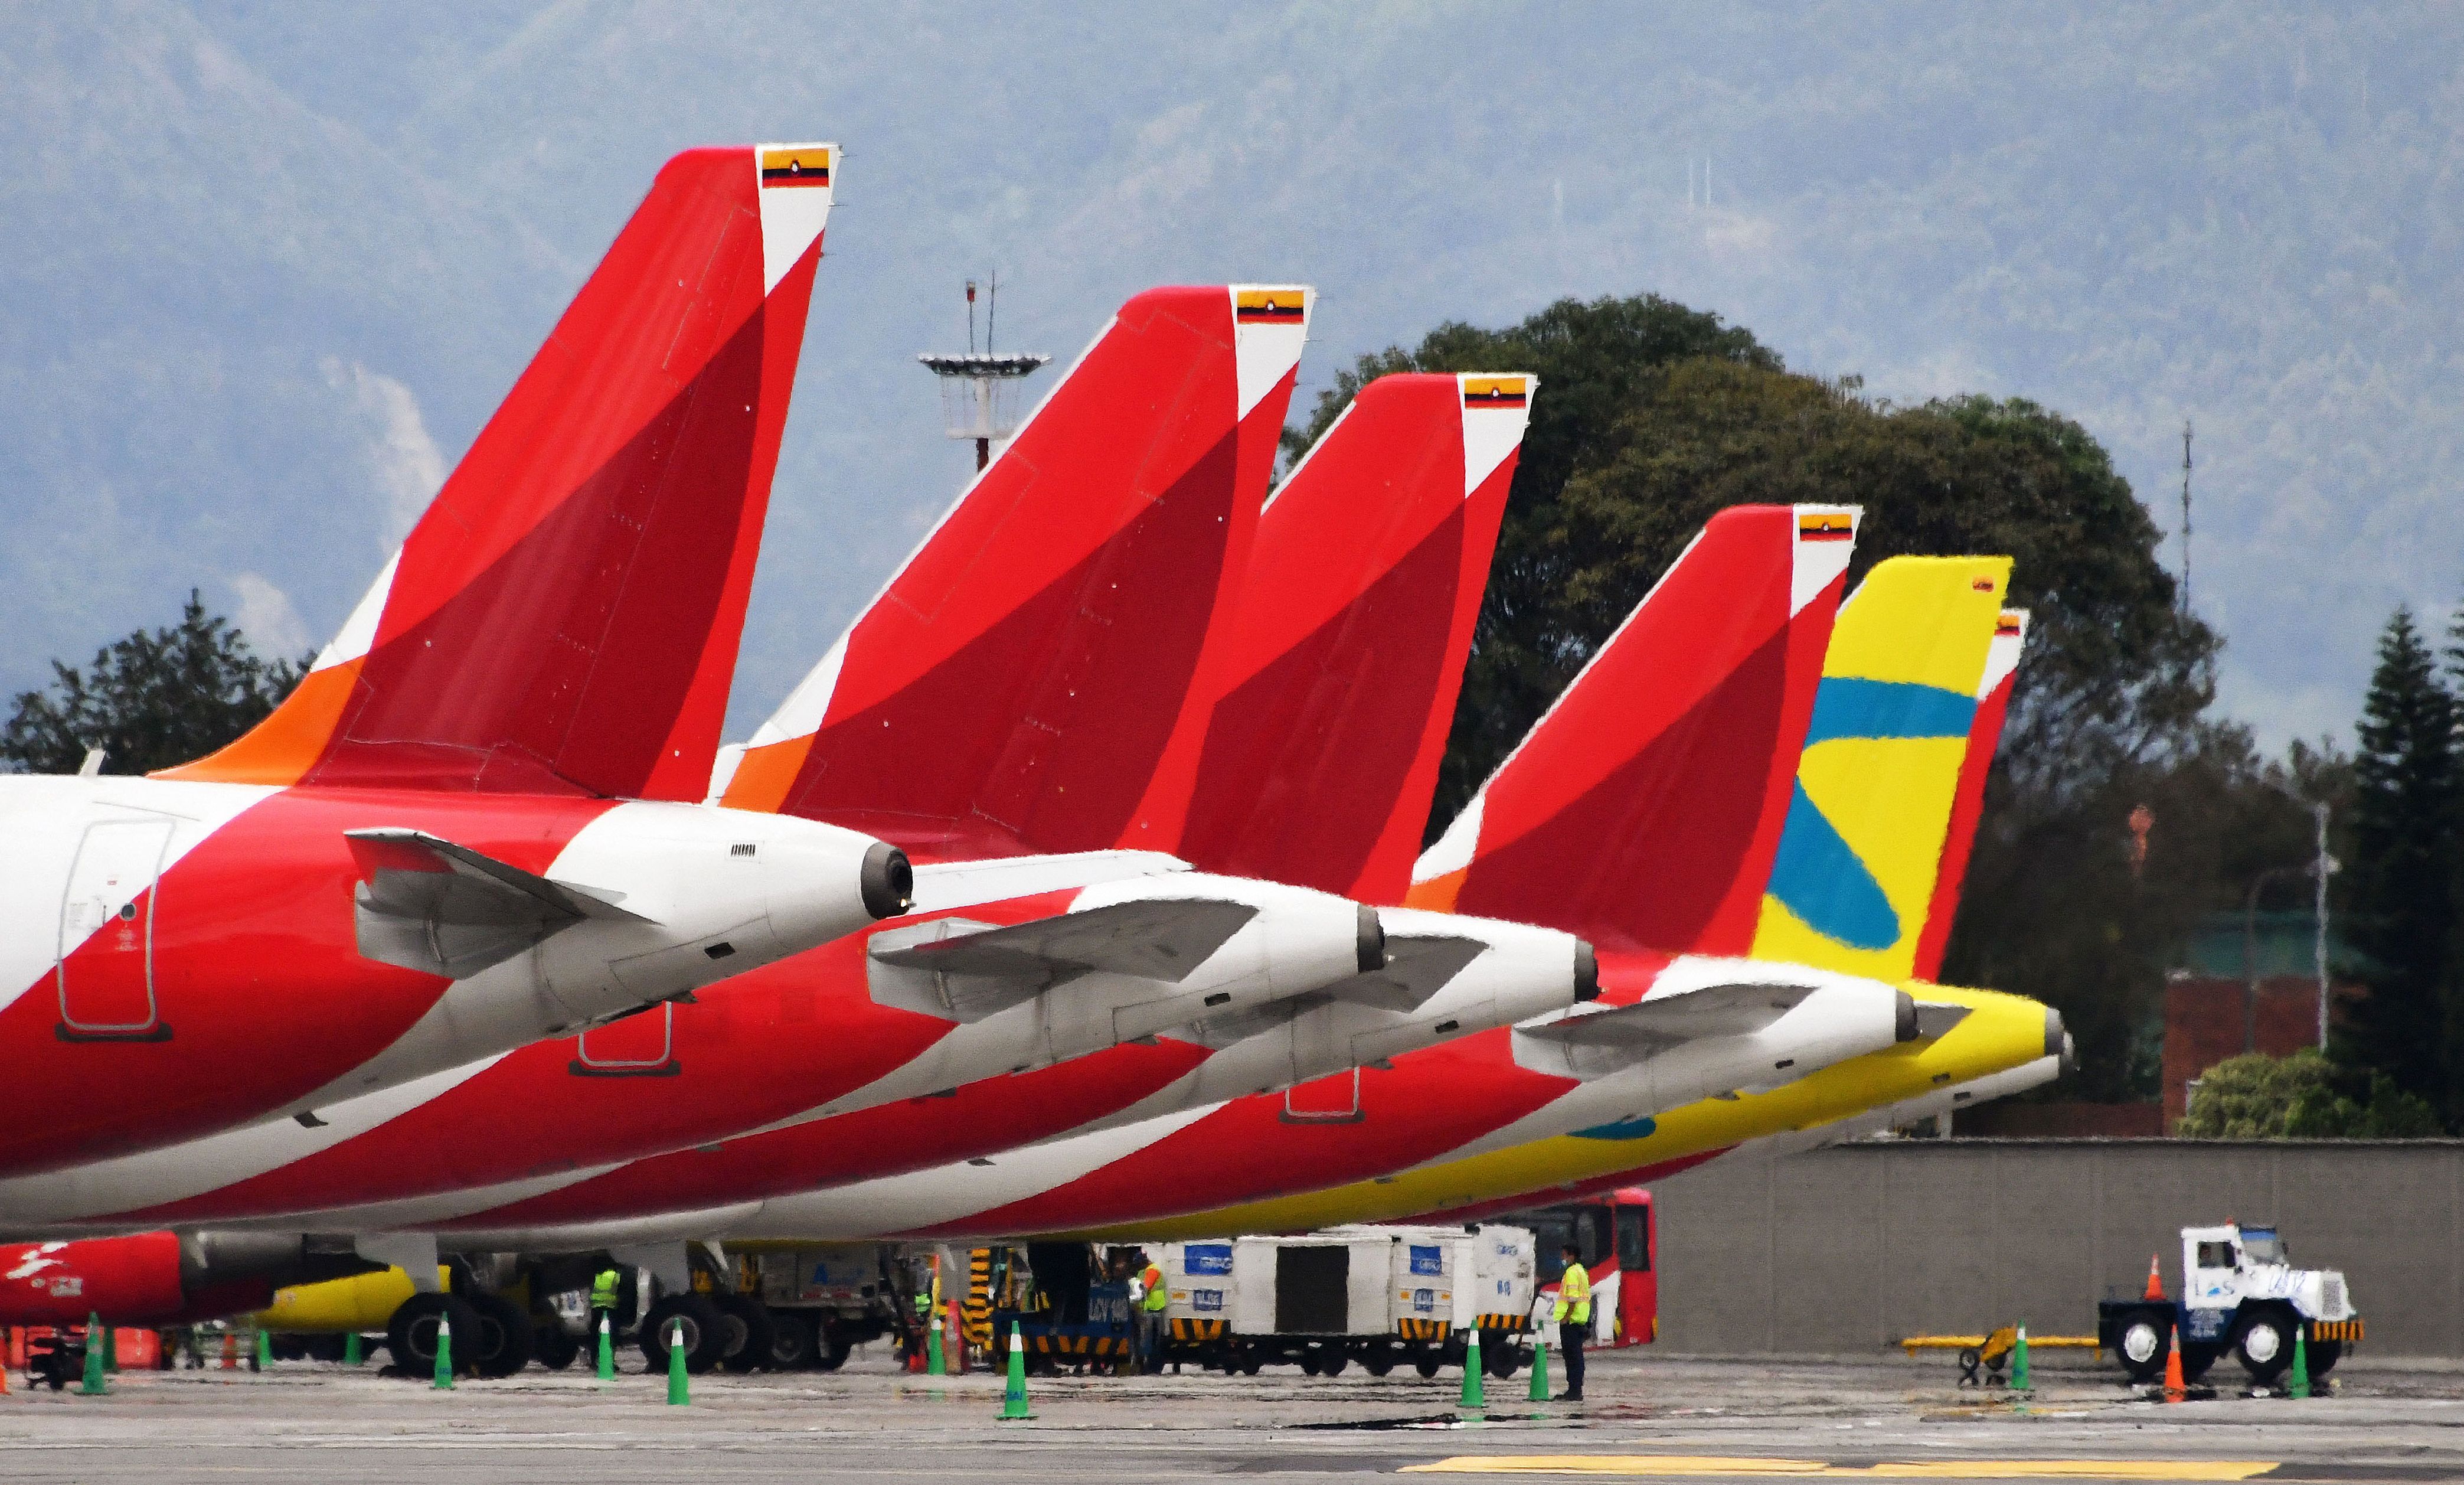 Five Avianca tails and an Viva tail